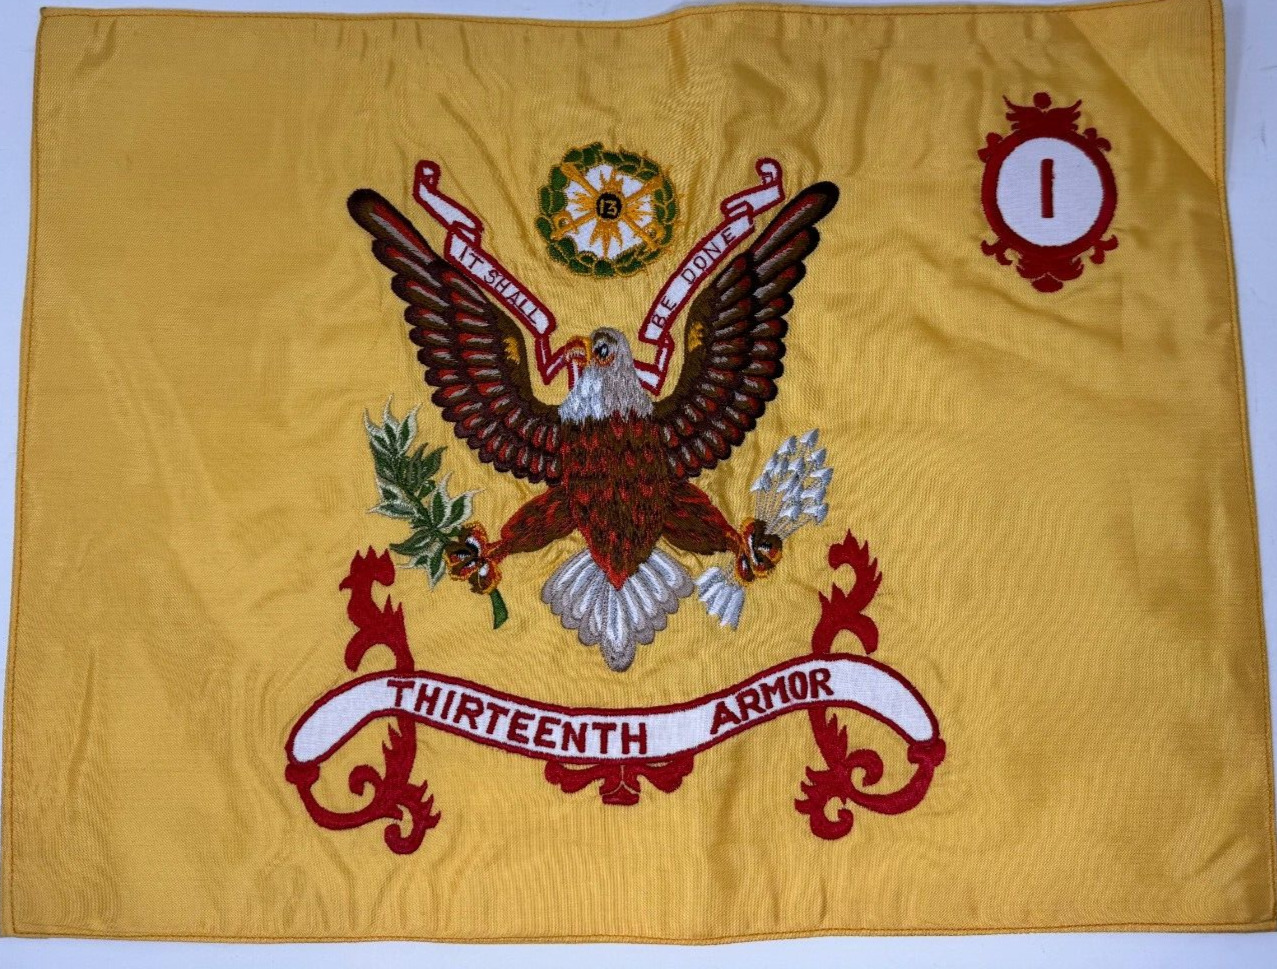 Vintage 13th Armor Regiment Flag It Shall Be Done, 15 By 11 Inches